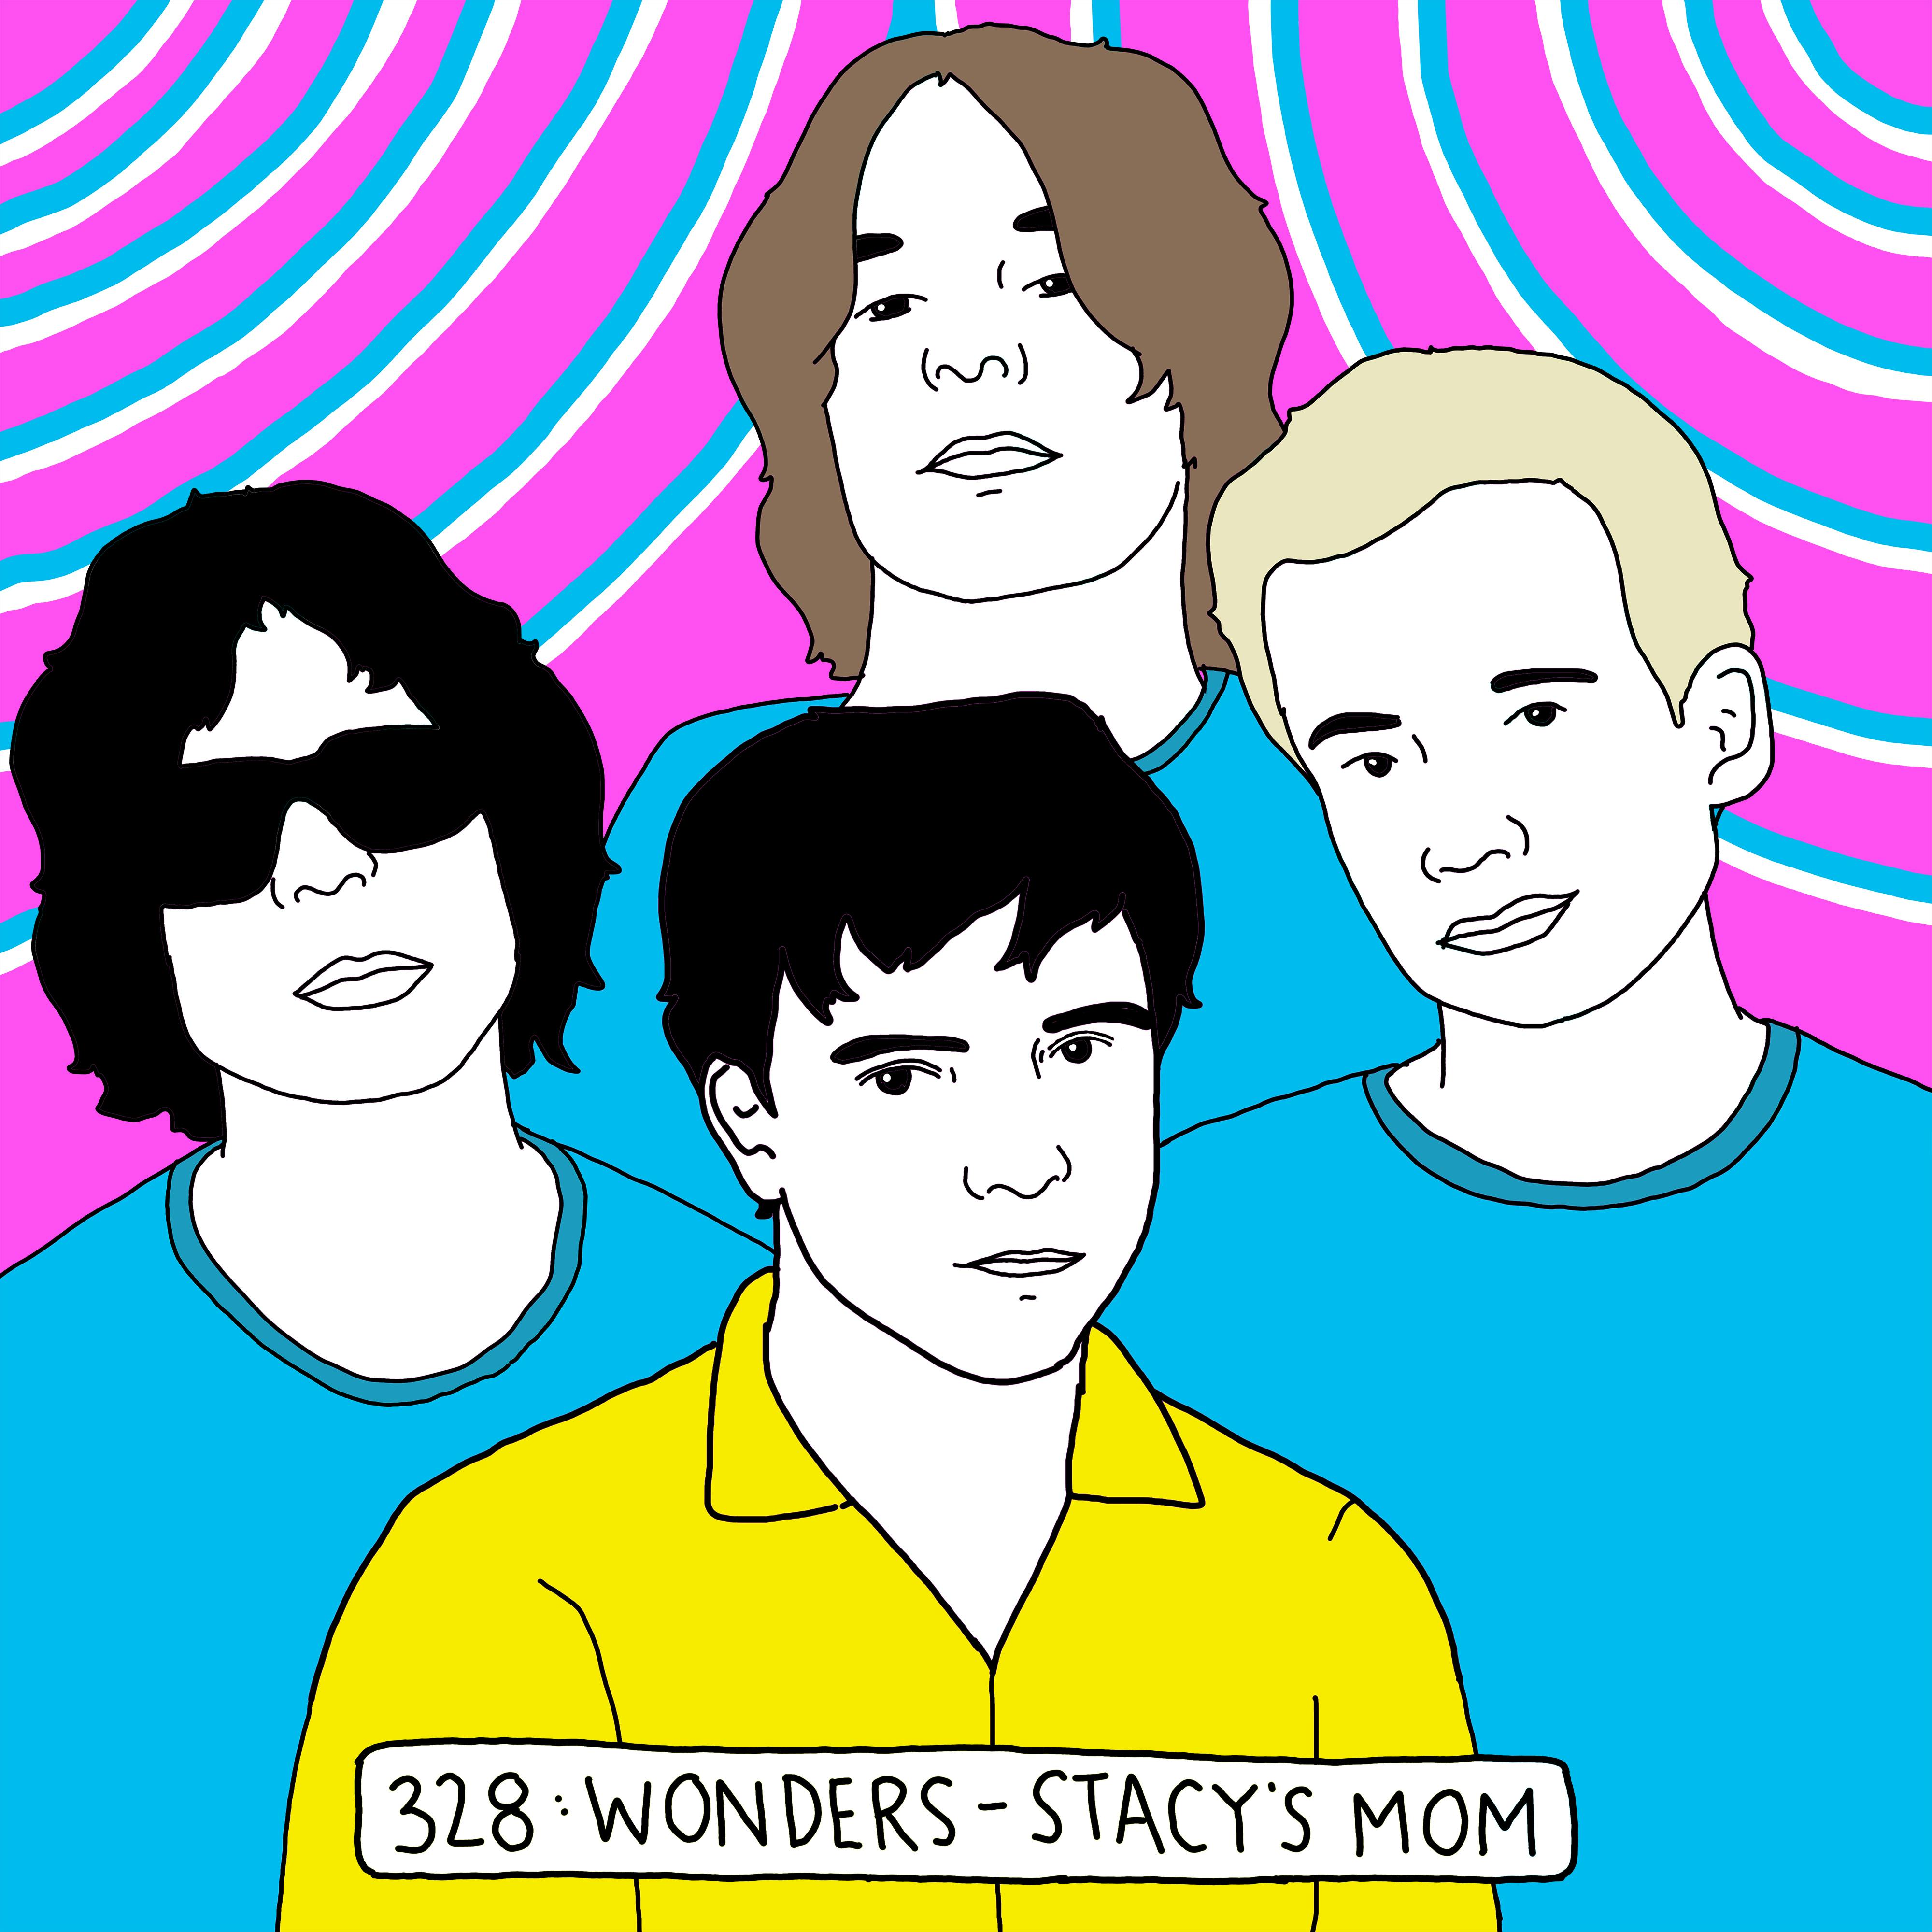 Wonders: ”Stacy’s Mom” and Adam Schlesinger